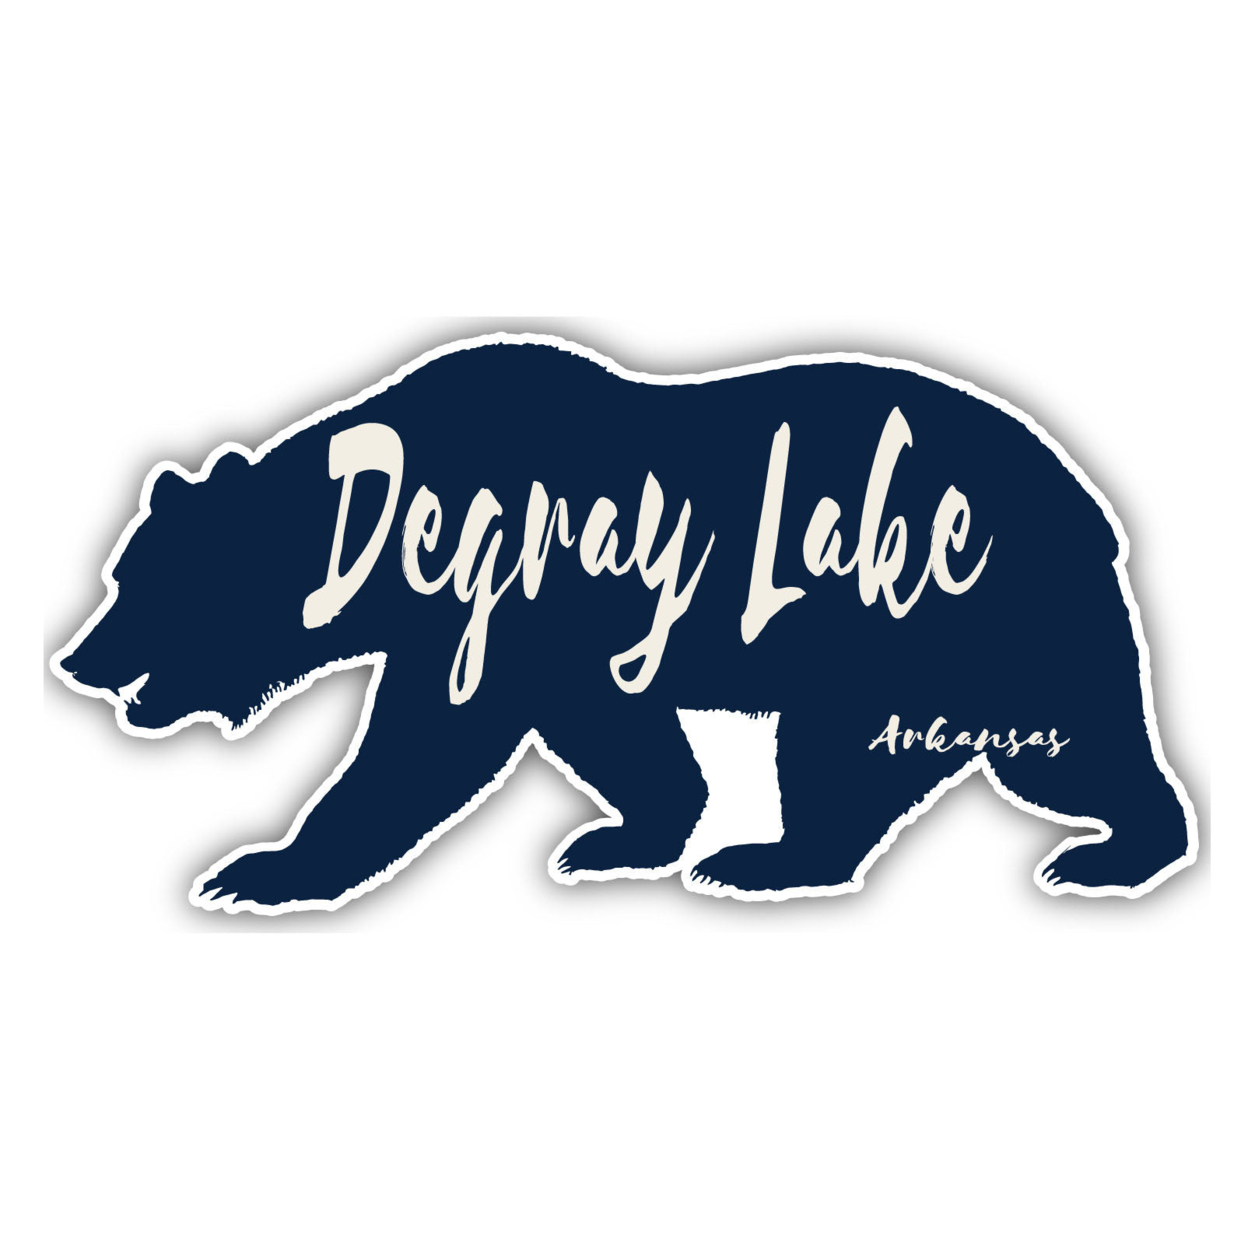 DeGray Lake Arkansas Souvenir Decorative Stickers (Choose Theme And Size) - 4-Pack, 4-Inch, Tent